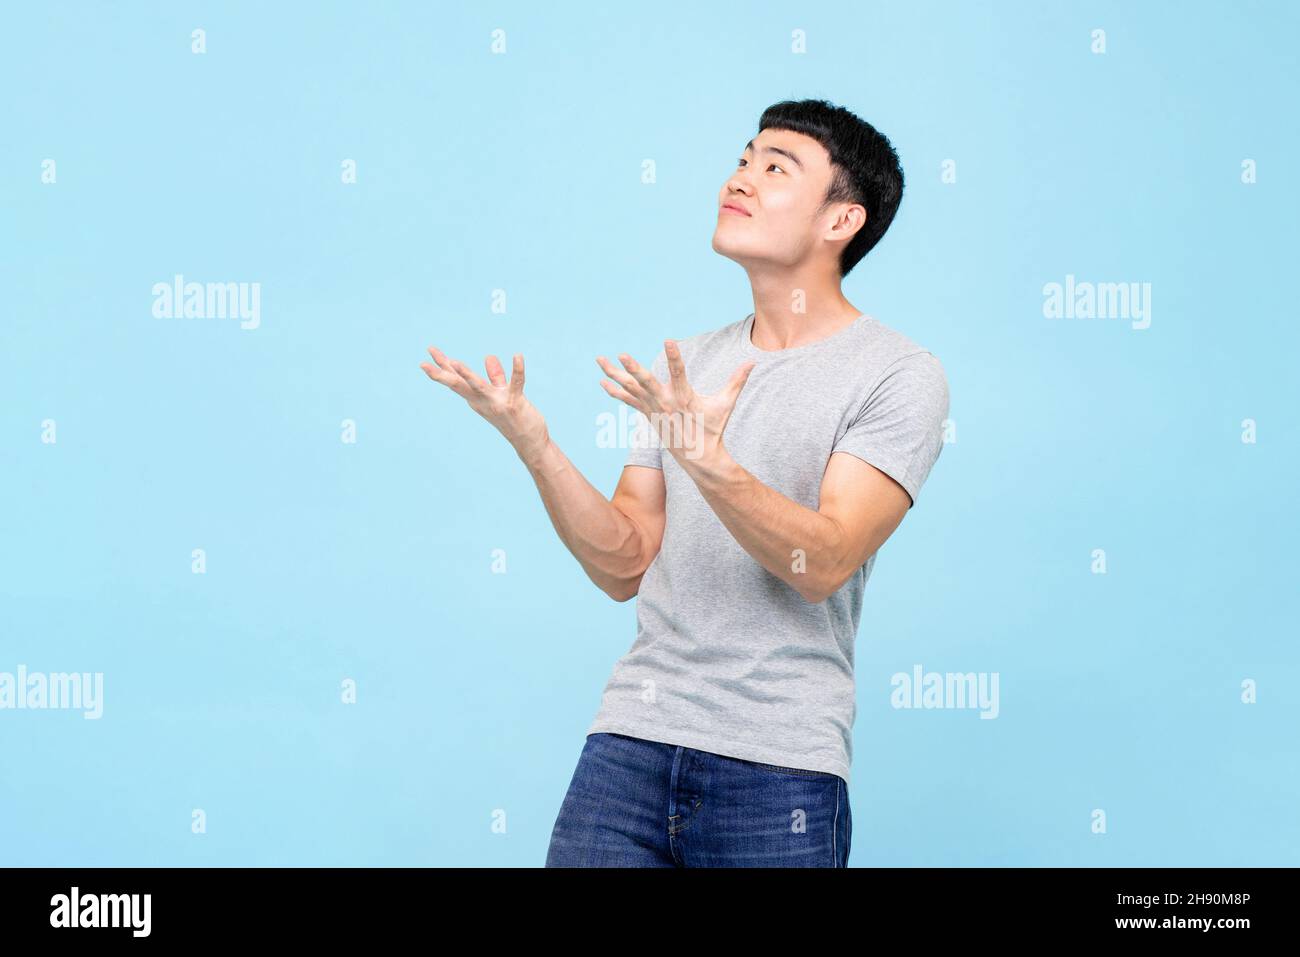 Asian man raising open hands with shocked face and looking at empty space above isolated on studio light blue background Stock Photo